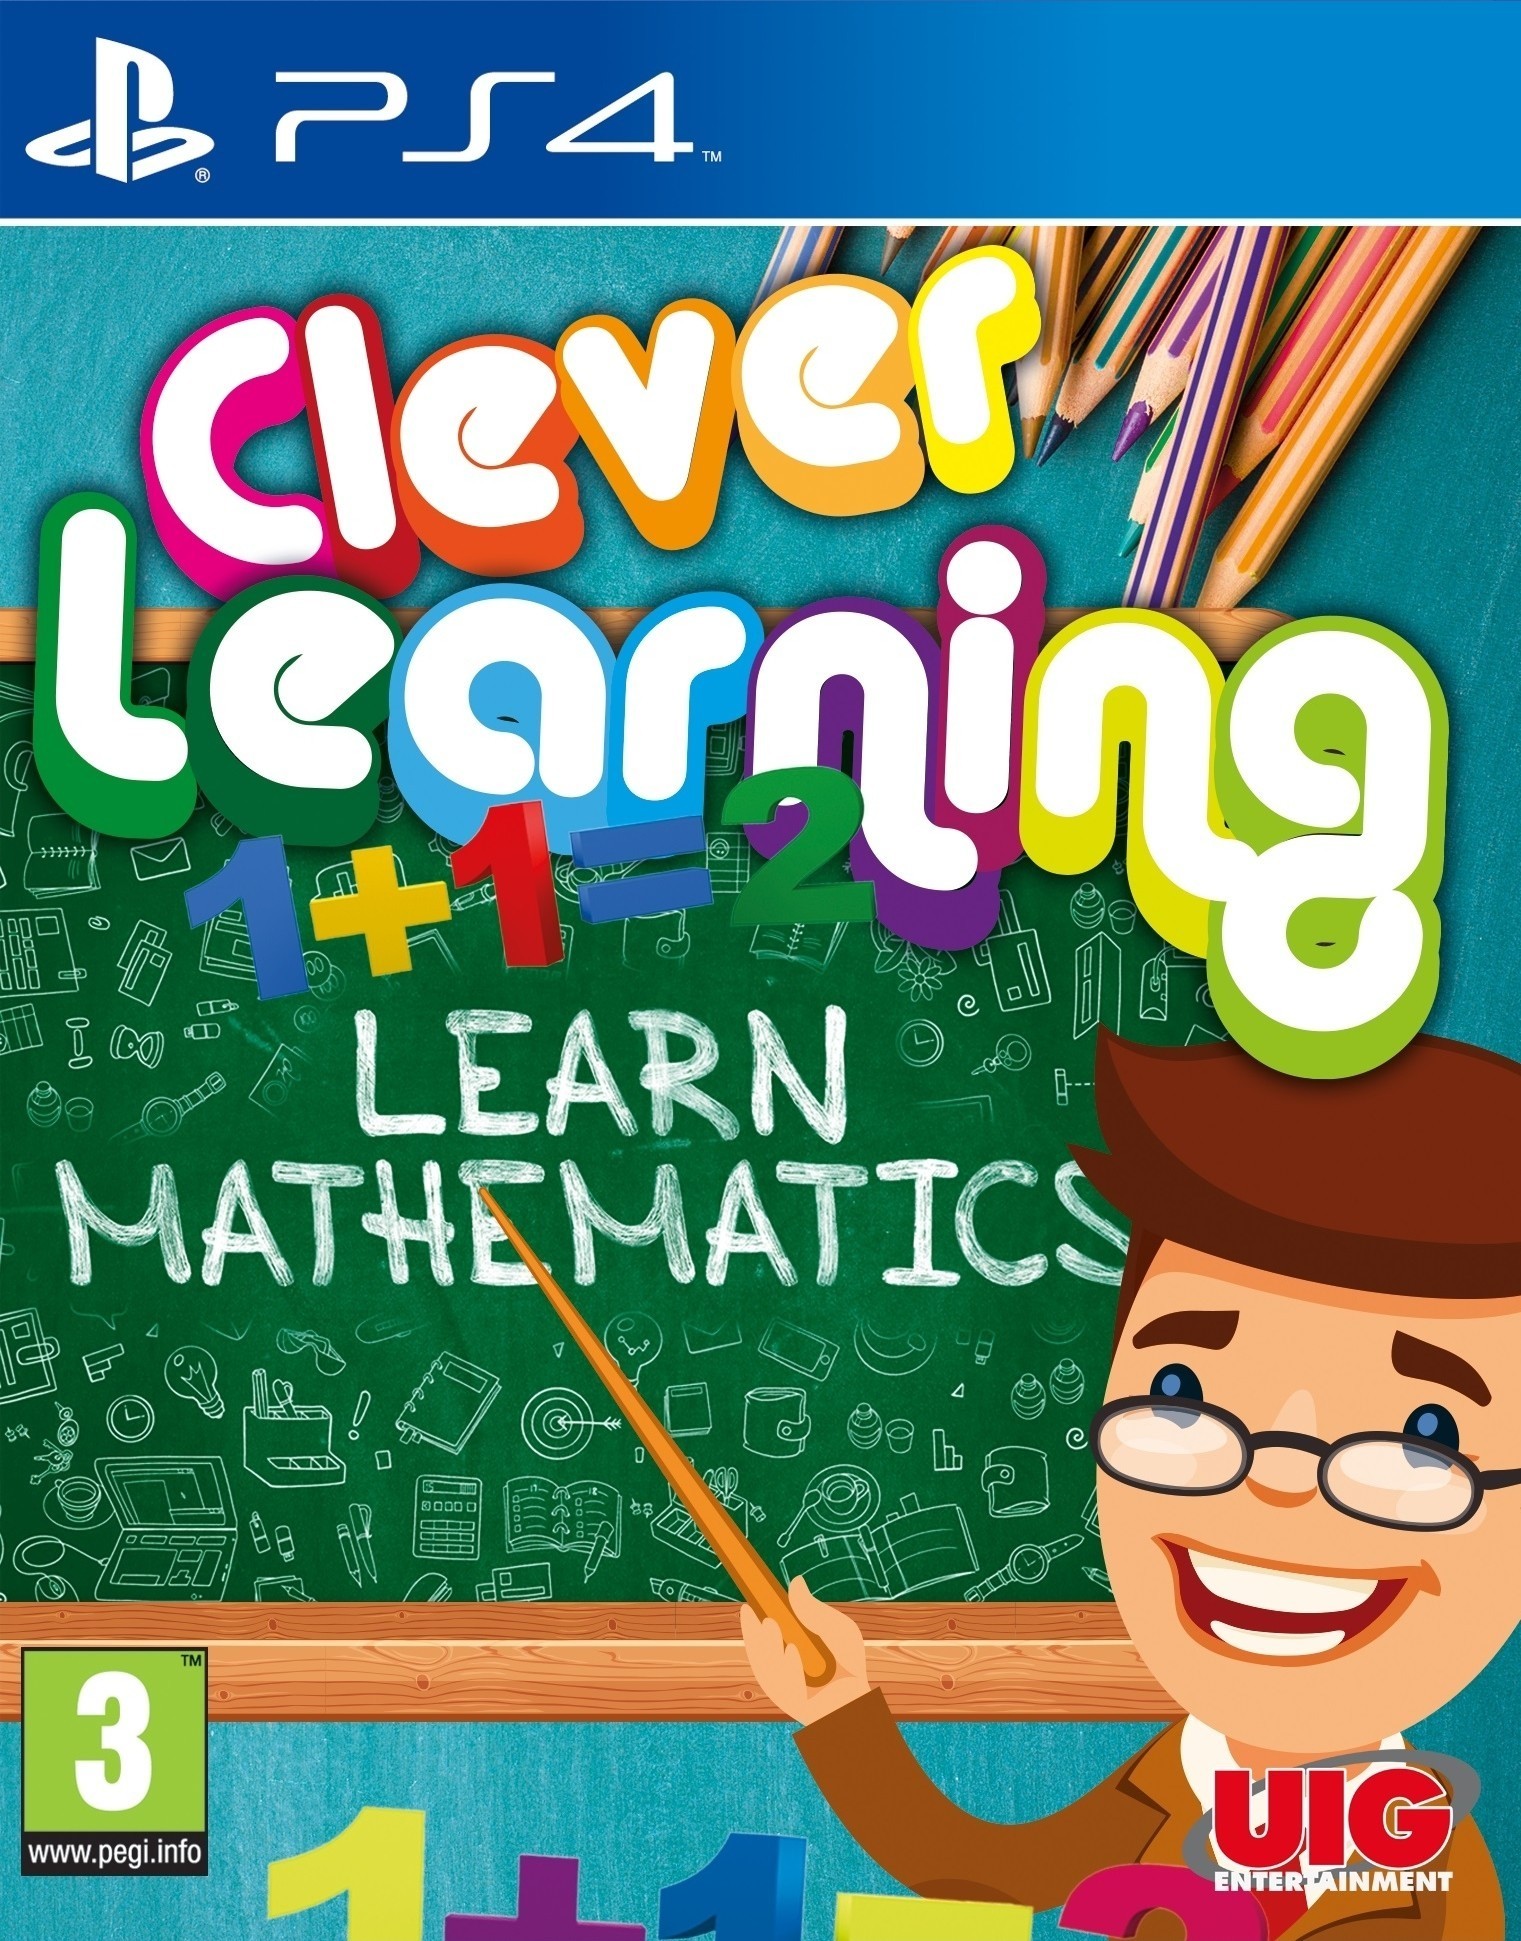 Clever Learning Mathematik 1 + 2 (PS4), UIG Entertainment